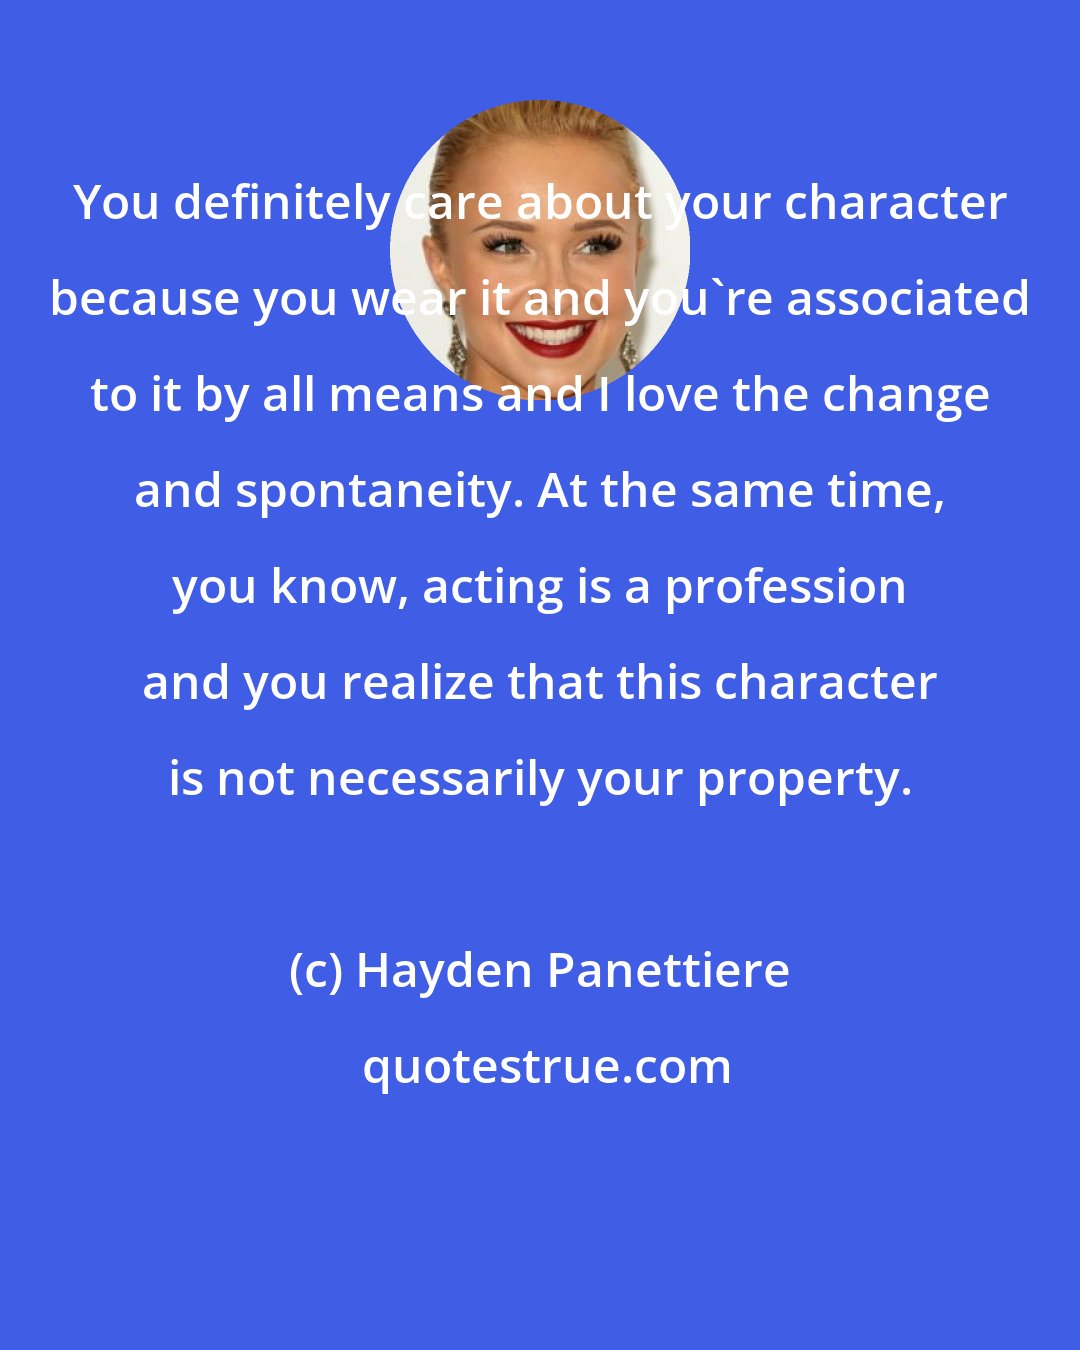 Hayden Panettiere: You definitely care about your character because you wear it and you're associated to it by all means and I love the change and spontaneity. At the same time, you know, acting is a profession and you realize that this character is not necessarily your property.